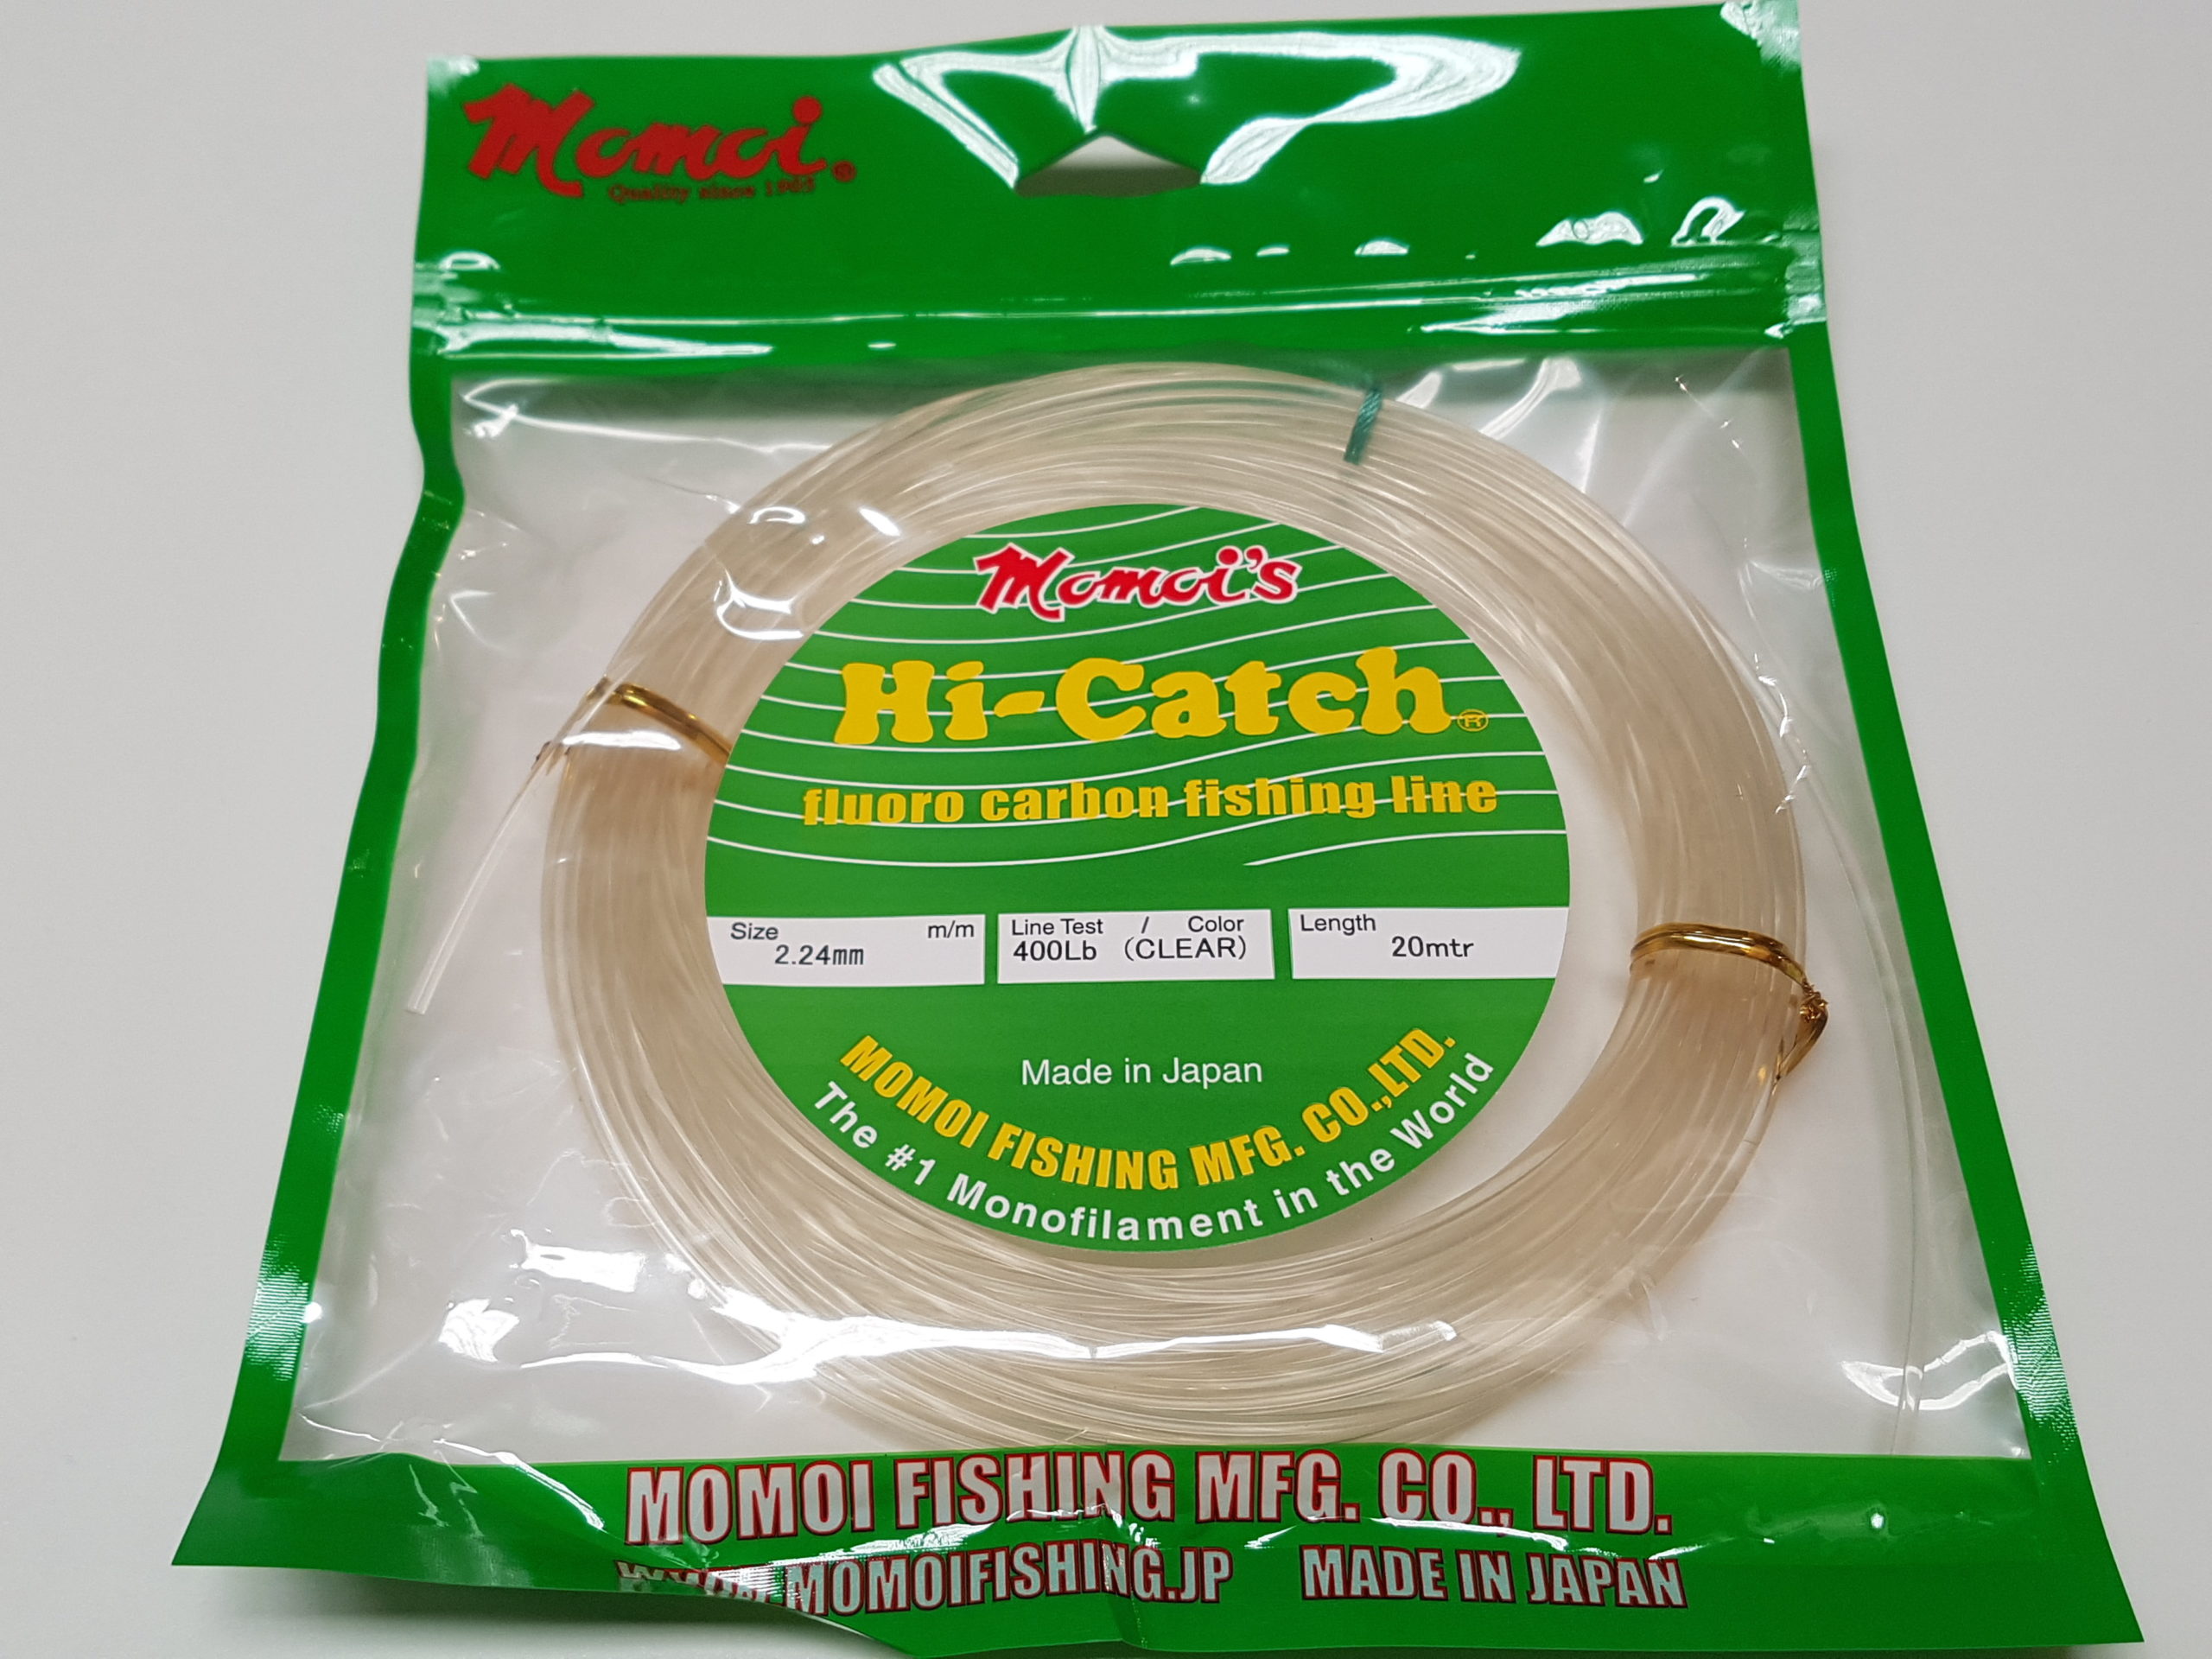 Momoi Hi-Catch Fluoro Carbon Leader 20mtr, 30lb-150lb, 0.52mm-1.28mm, Clear - Cabral Outdoors at Rs 2366.00, Udupi